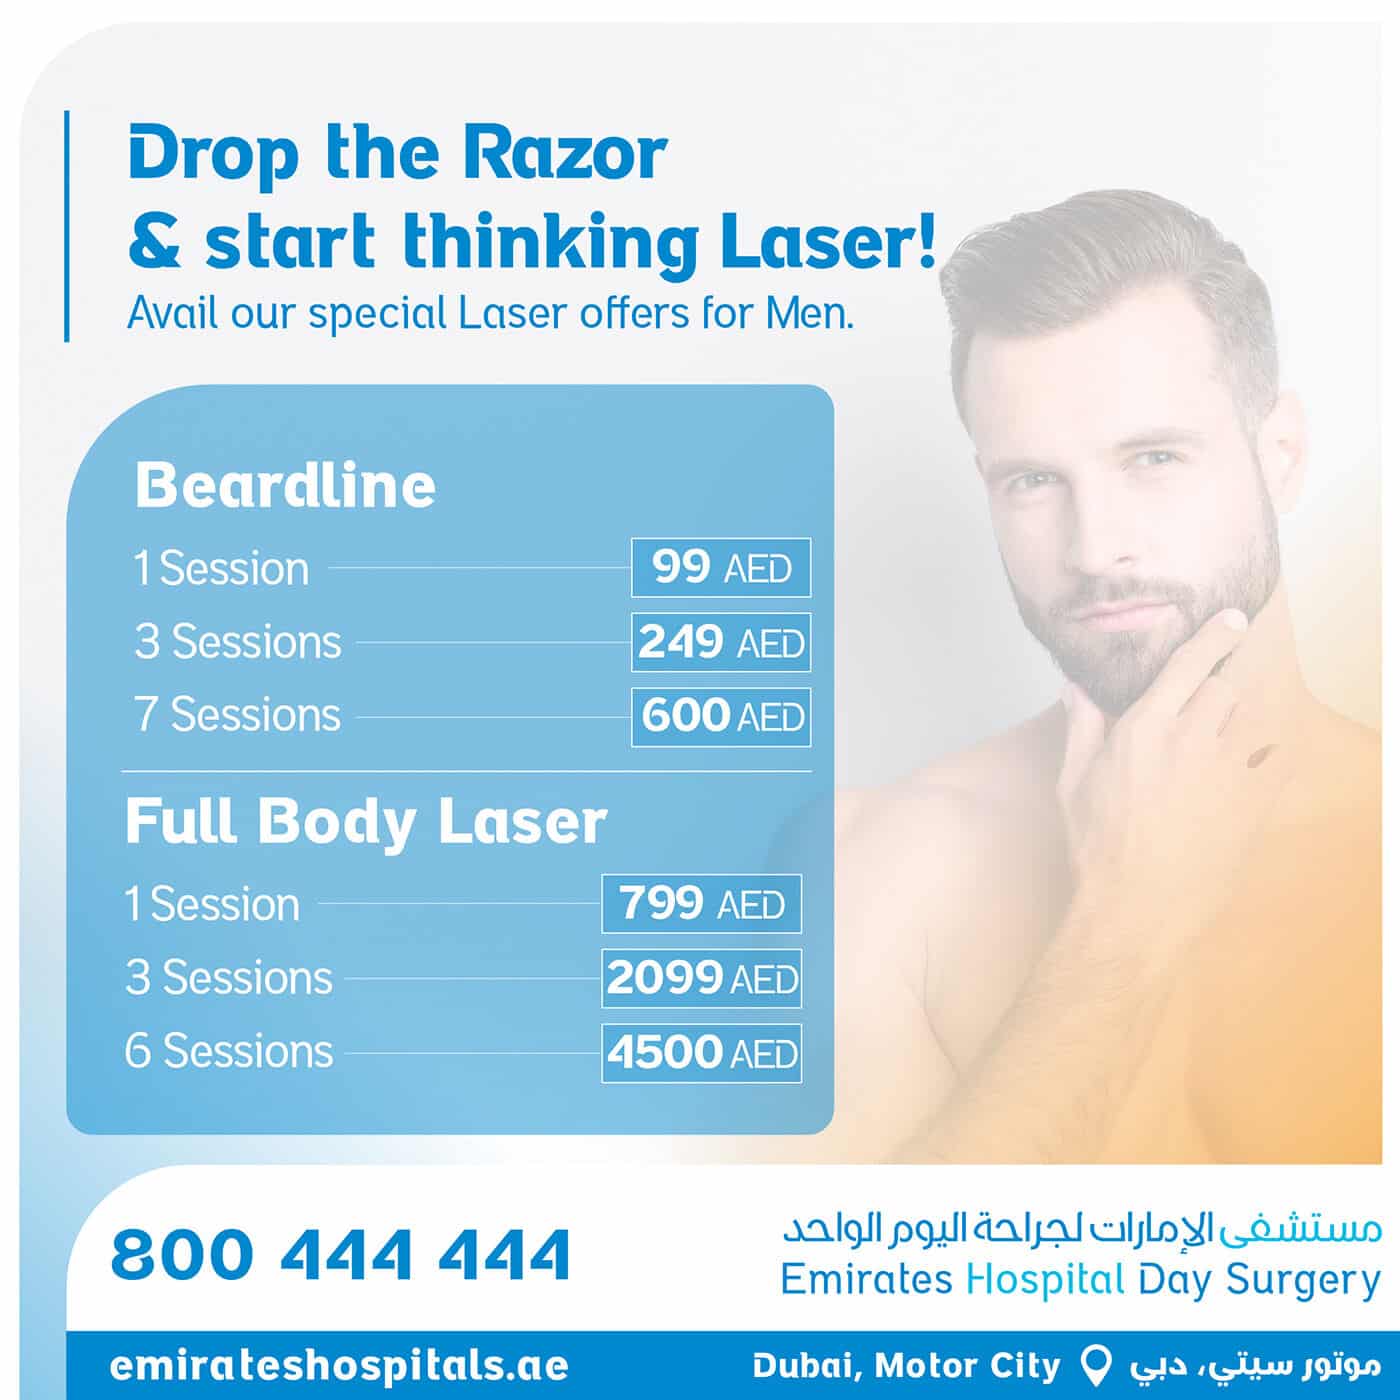 Full Body Laser Laser Hair Removal and Breadline offers for Man 2022